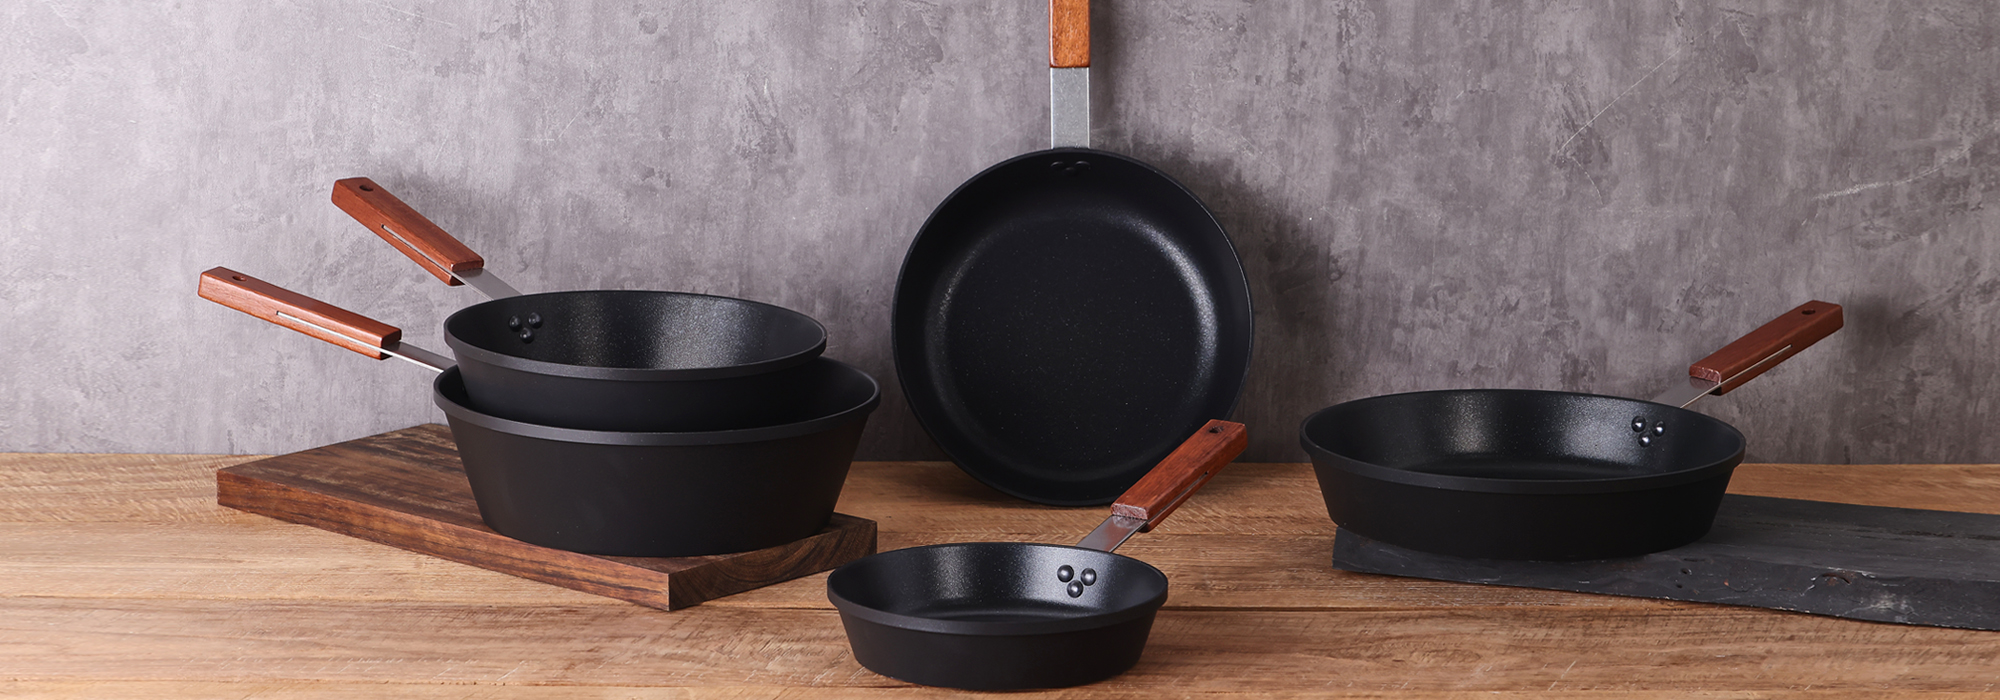 You Can Find Our Latest Nonstick Cookware Products Here. Chef Yori Cookware is the Best Wholesaler in the World.